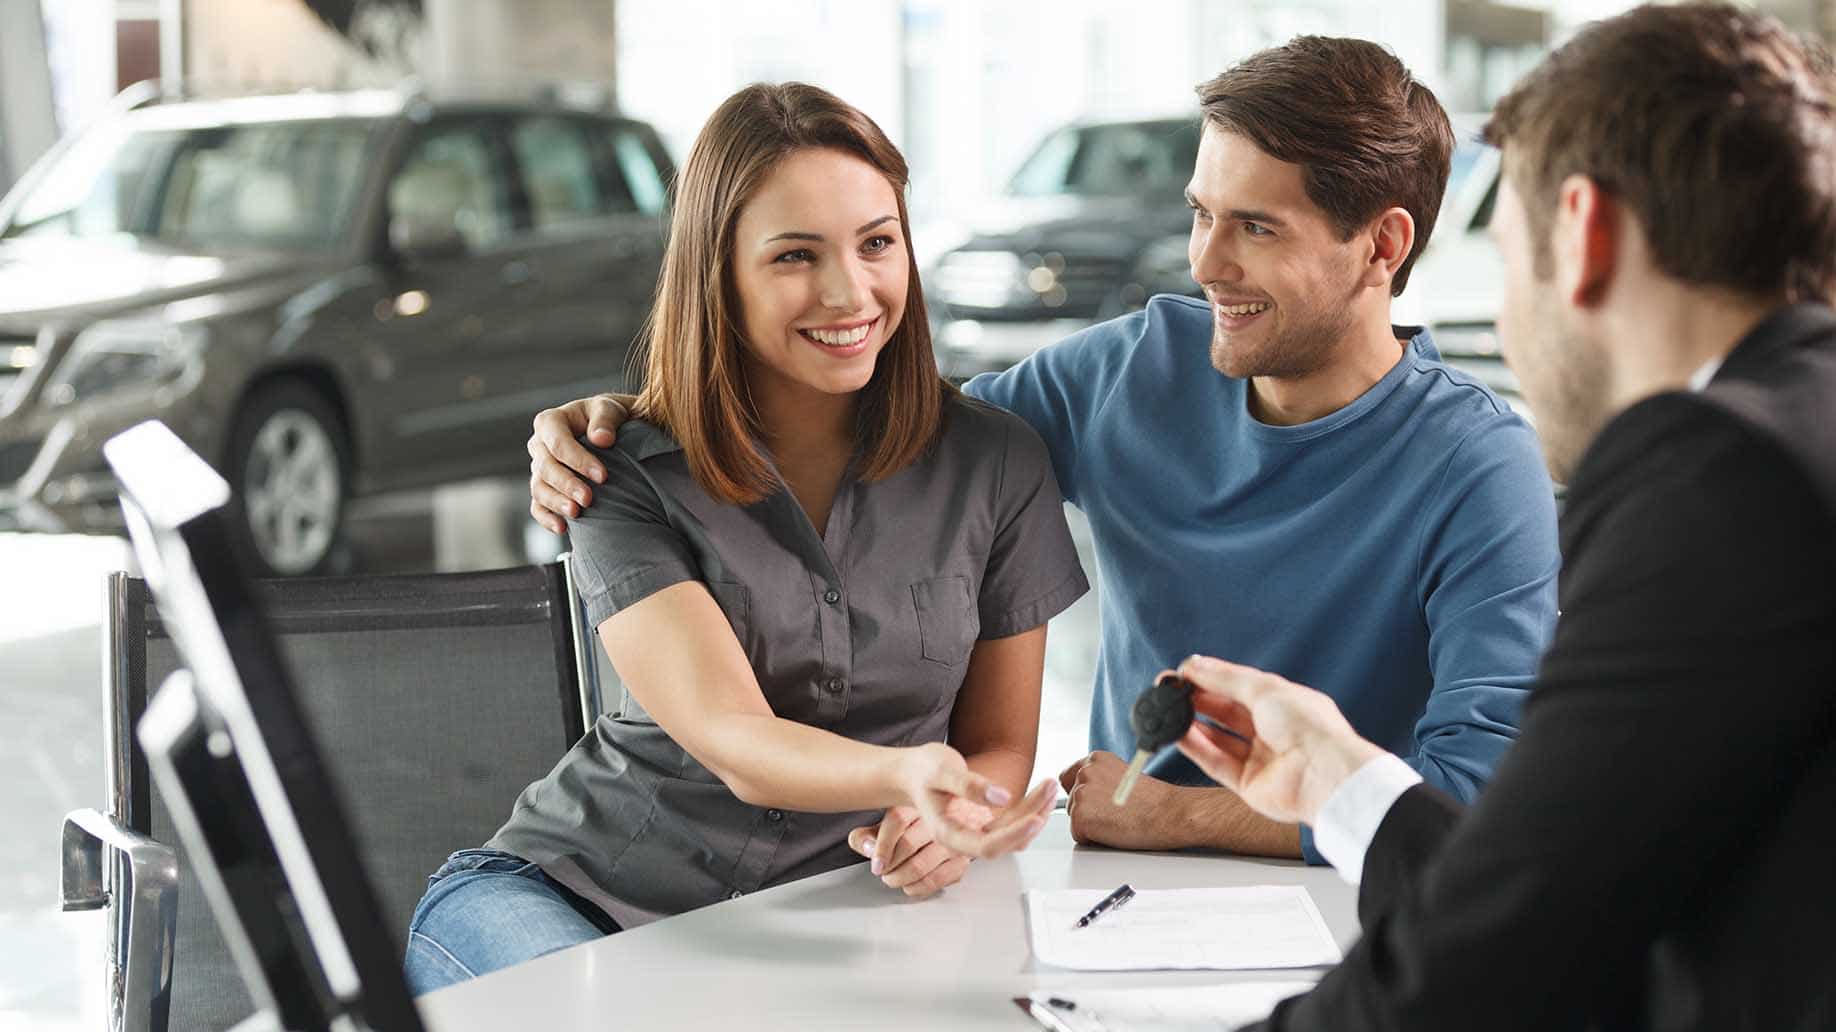 Top 7 Things to Look for When Choosing a Car Dealership